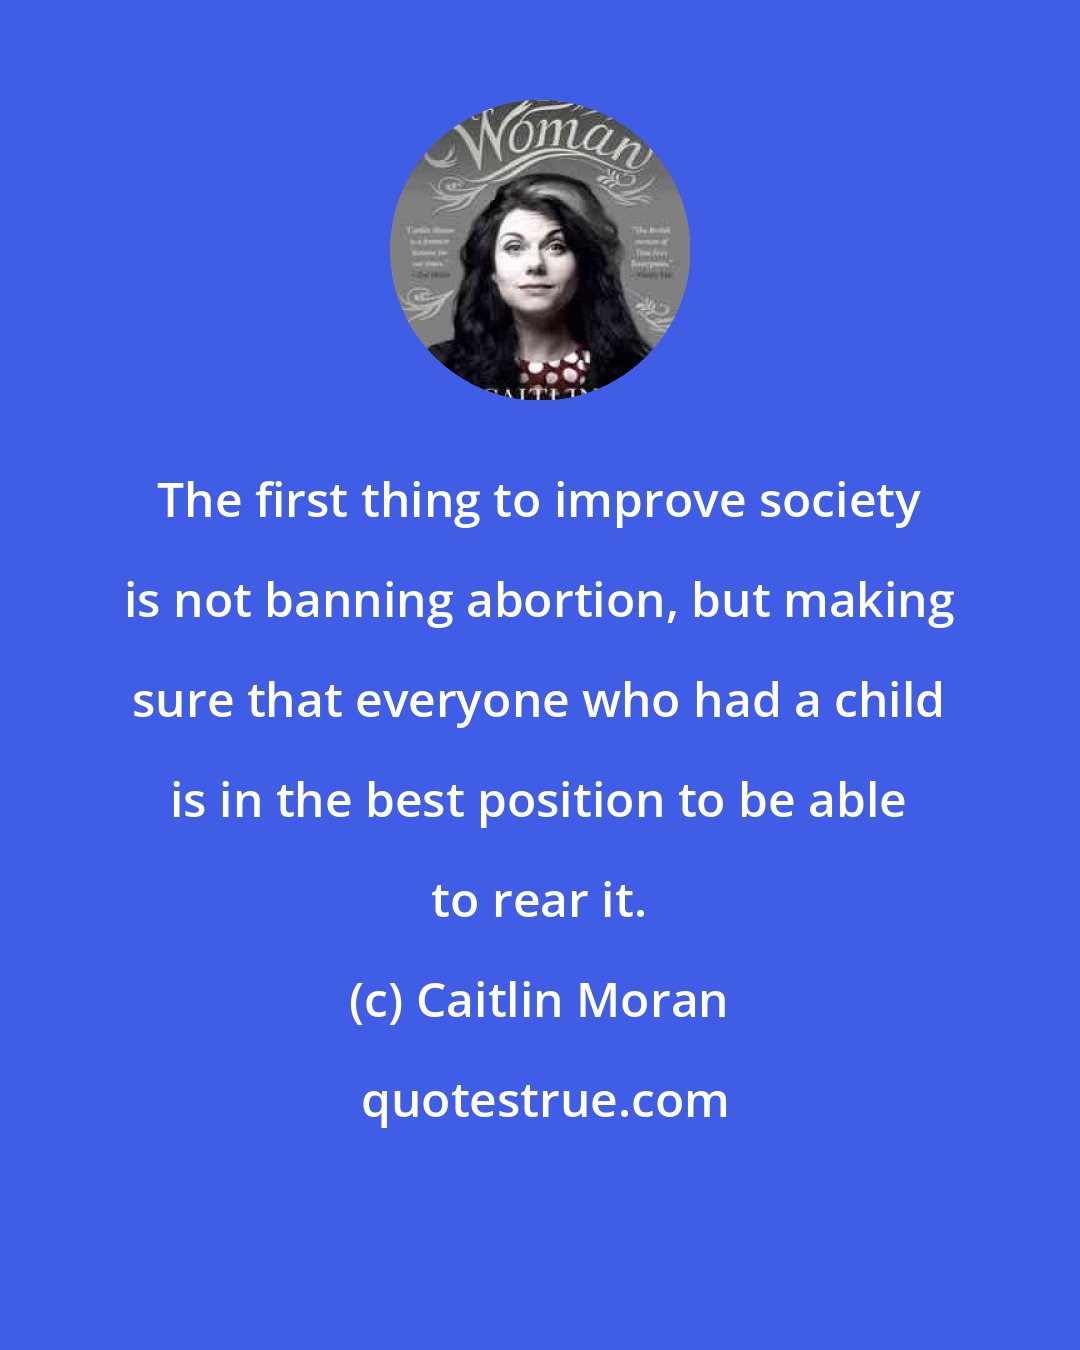 Caitlin Moran: The first thing to improve society is not banning abortion, but making sure that everyone who had a child is in the best position to be able to rear it.